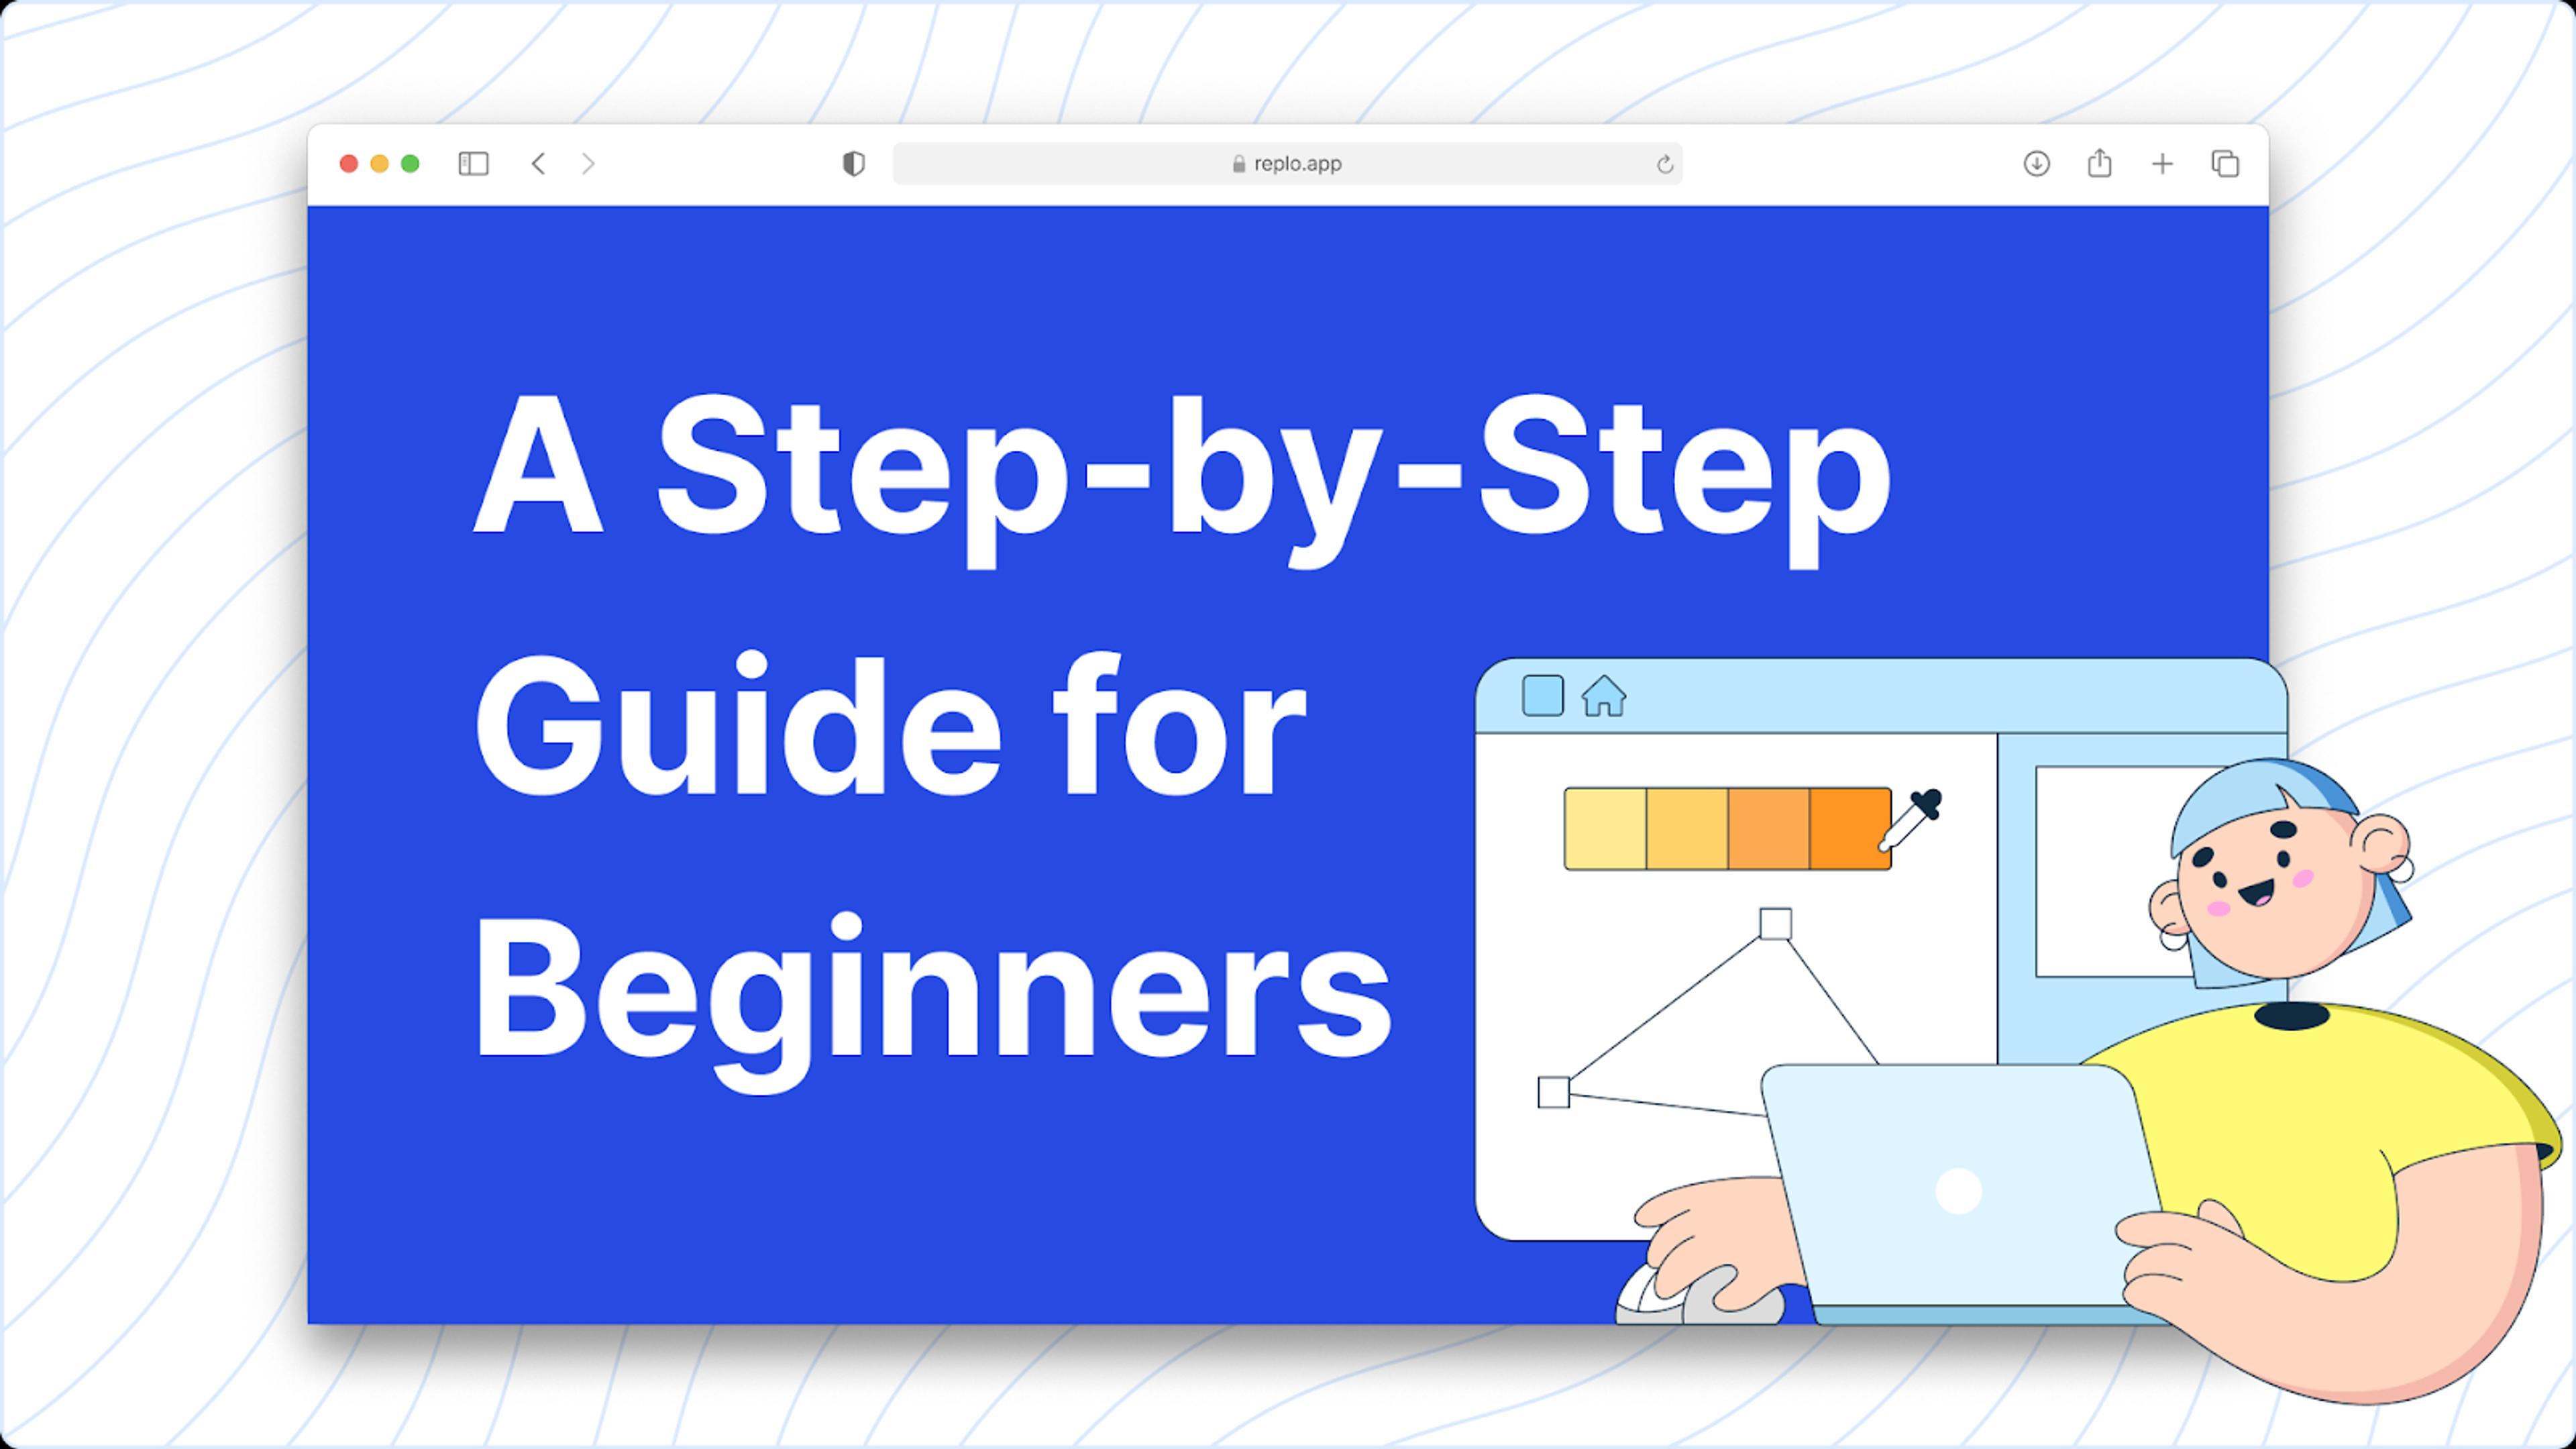 A Step-by-Step Guide for Beginners